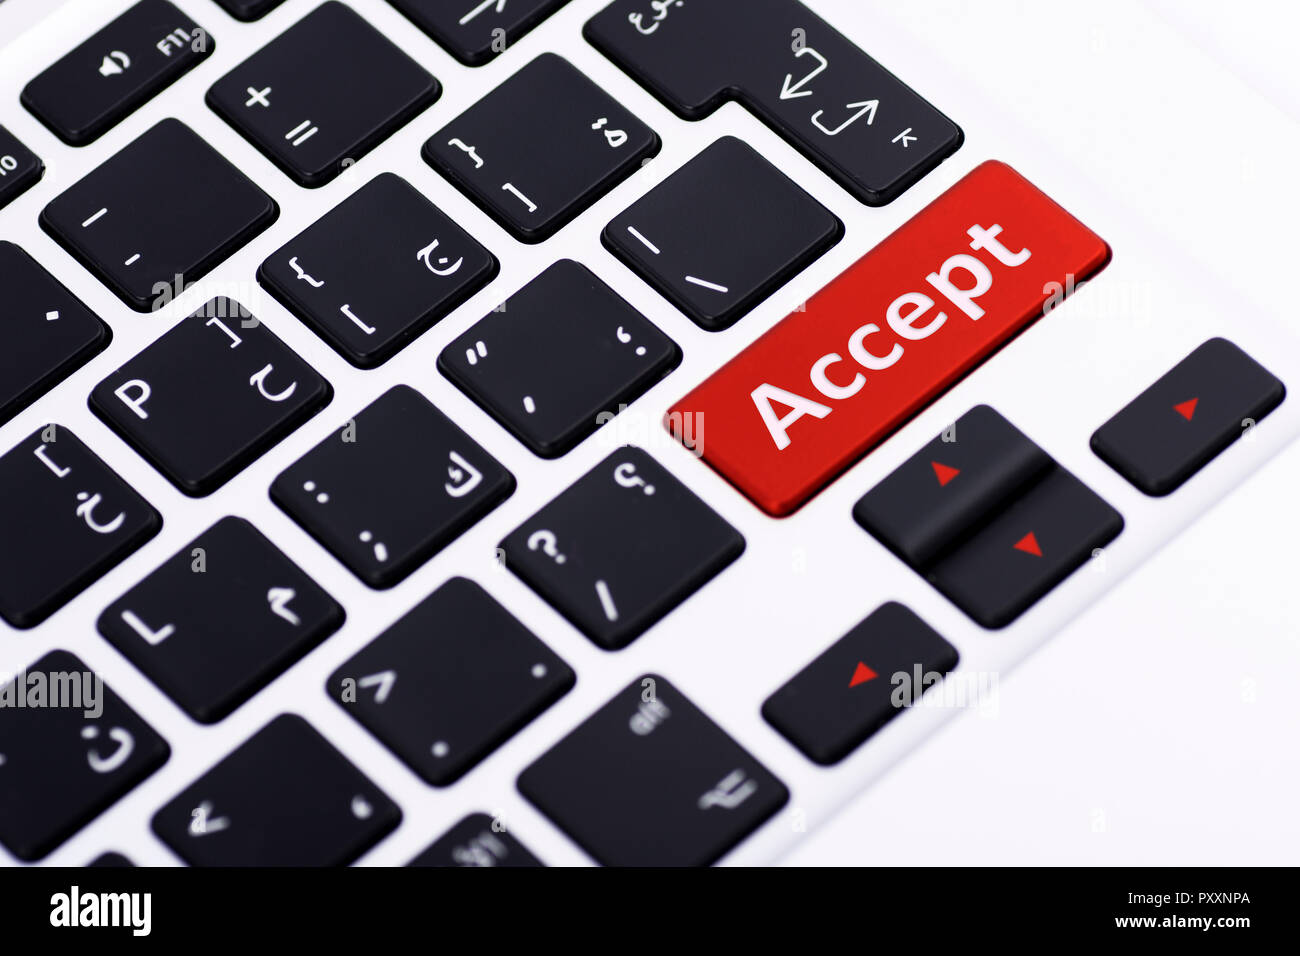 Accept on keyboard button Stock Photo